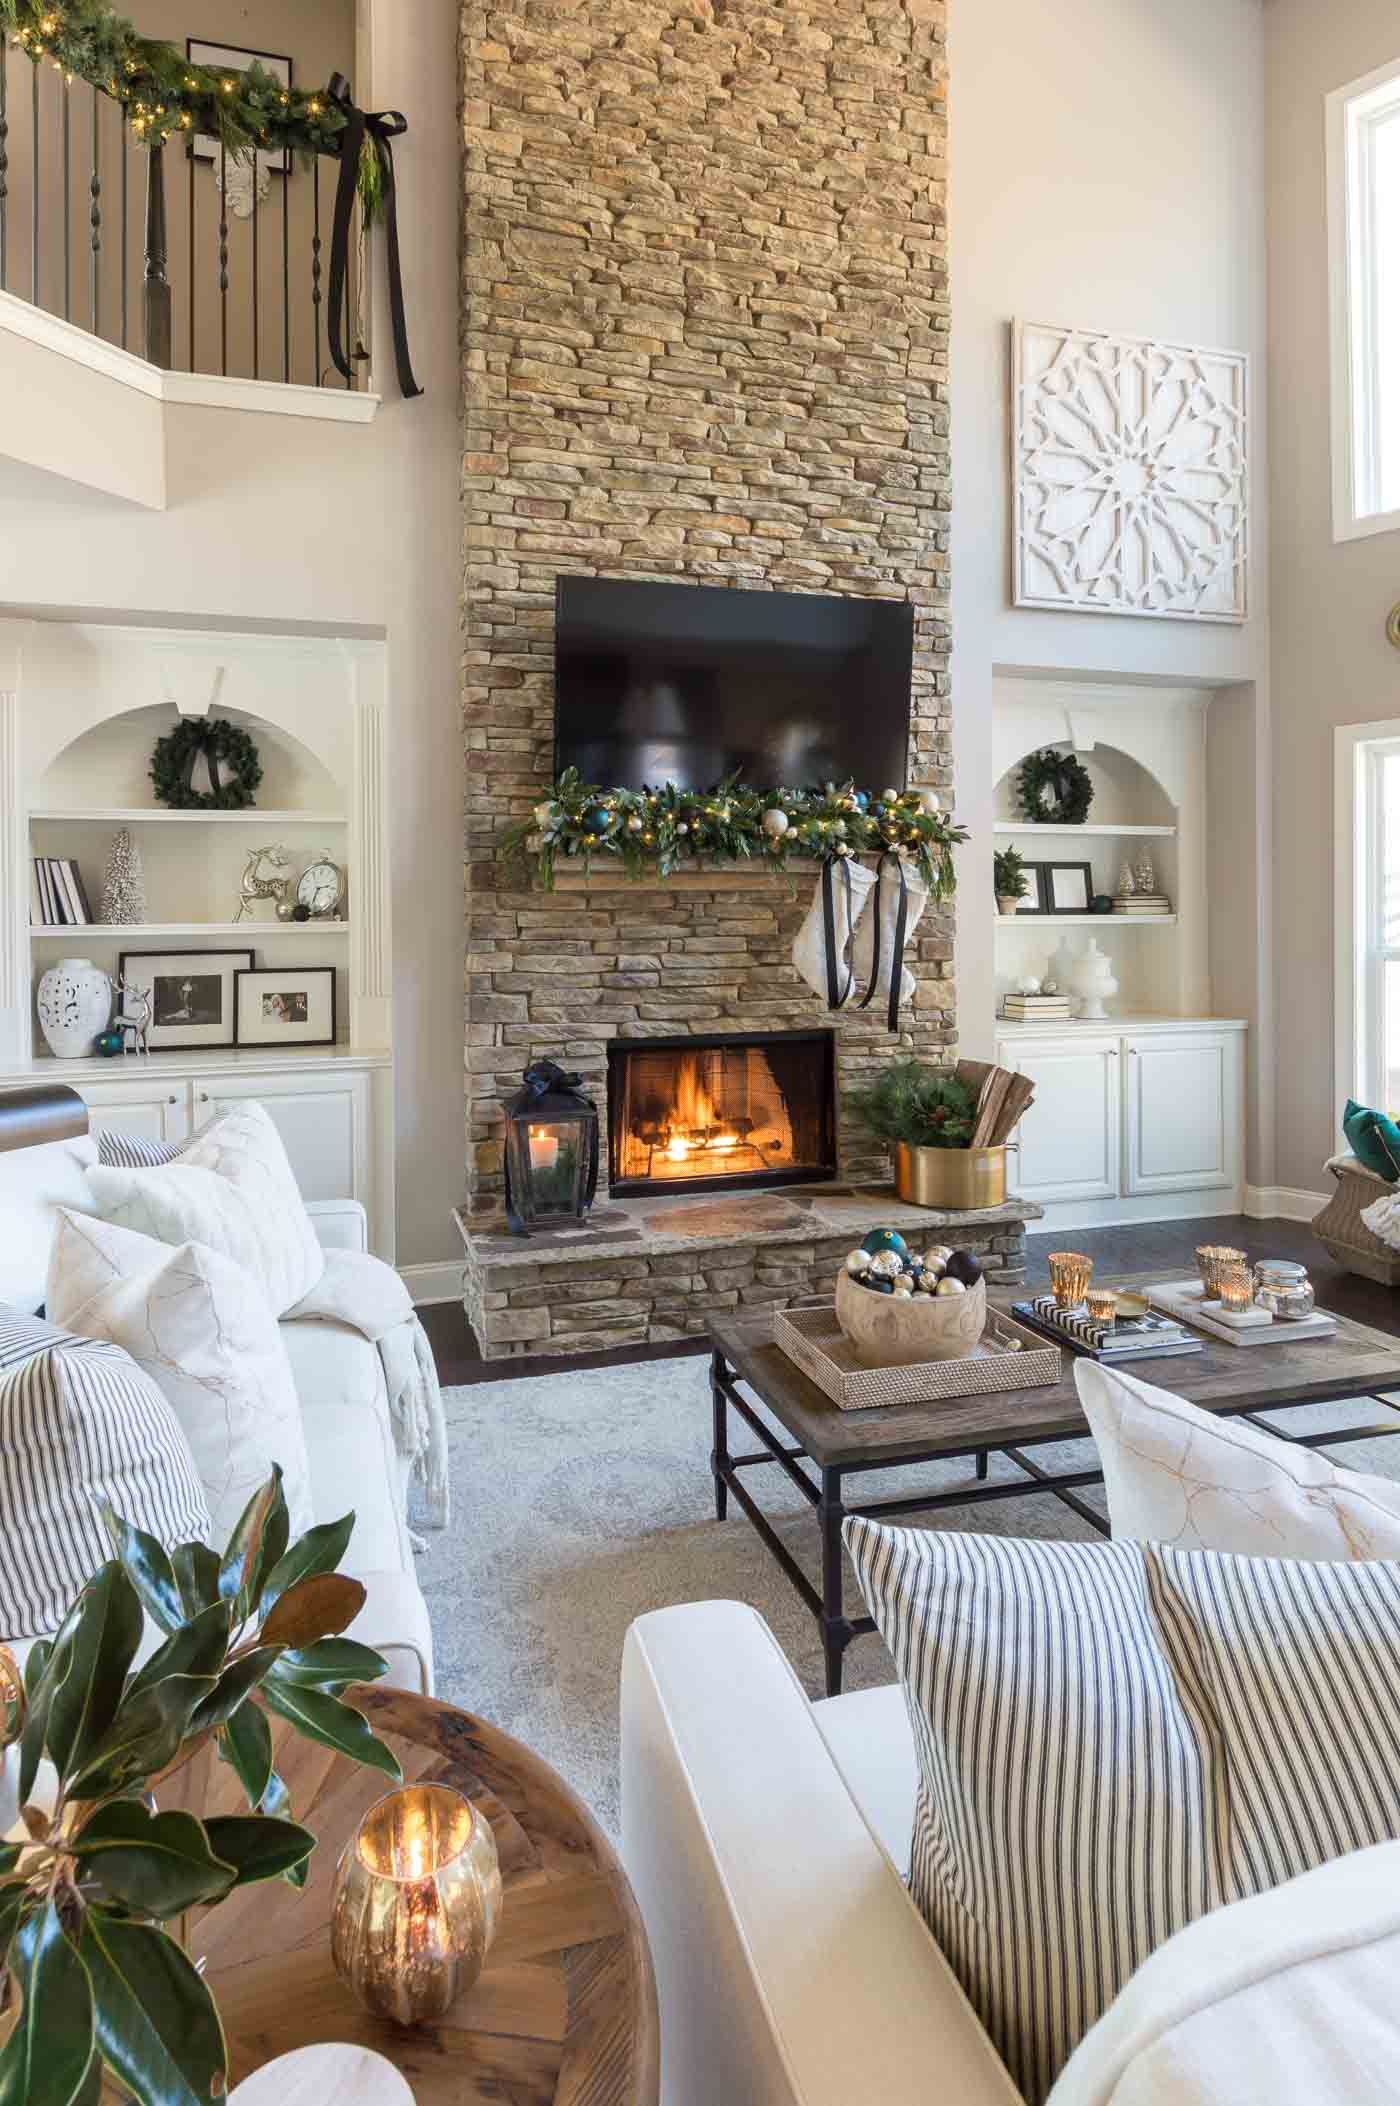 Shores Fireplace Beautiful Simple and Elegant Christmas Decorations In the Living Room